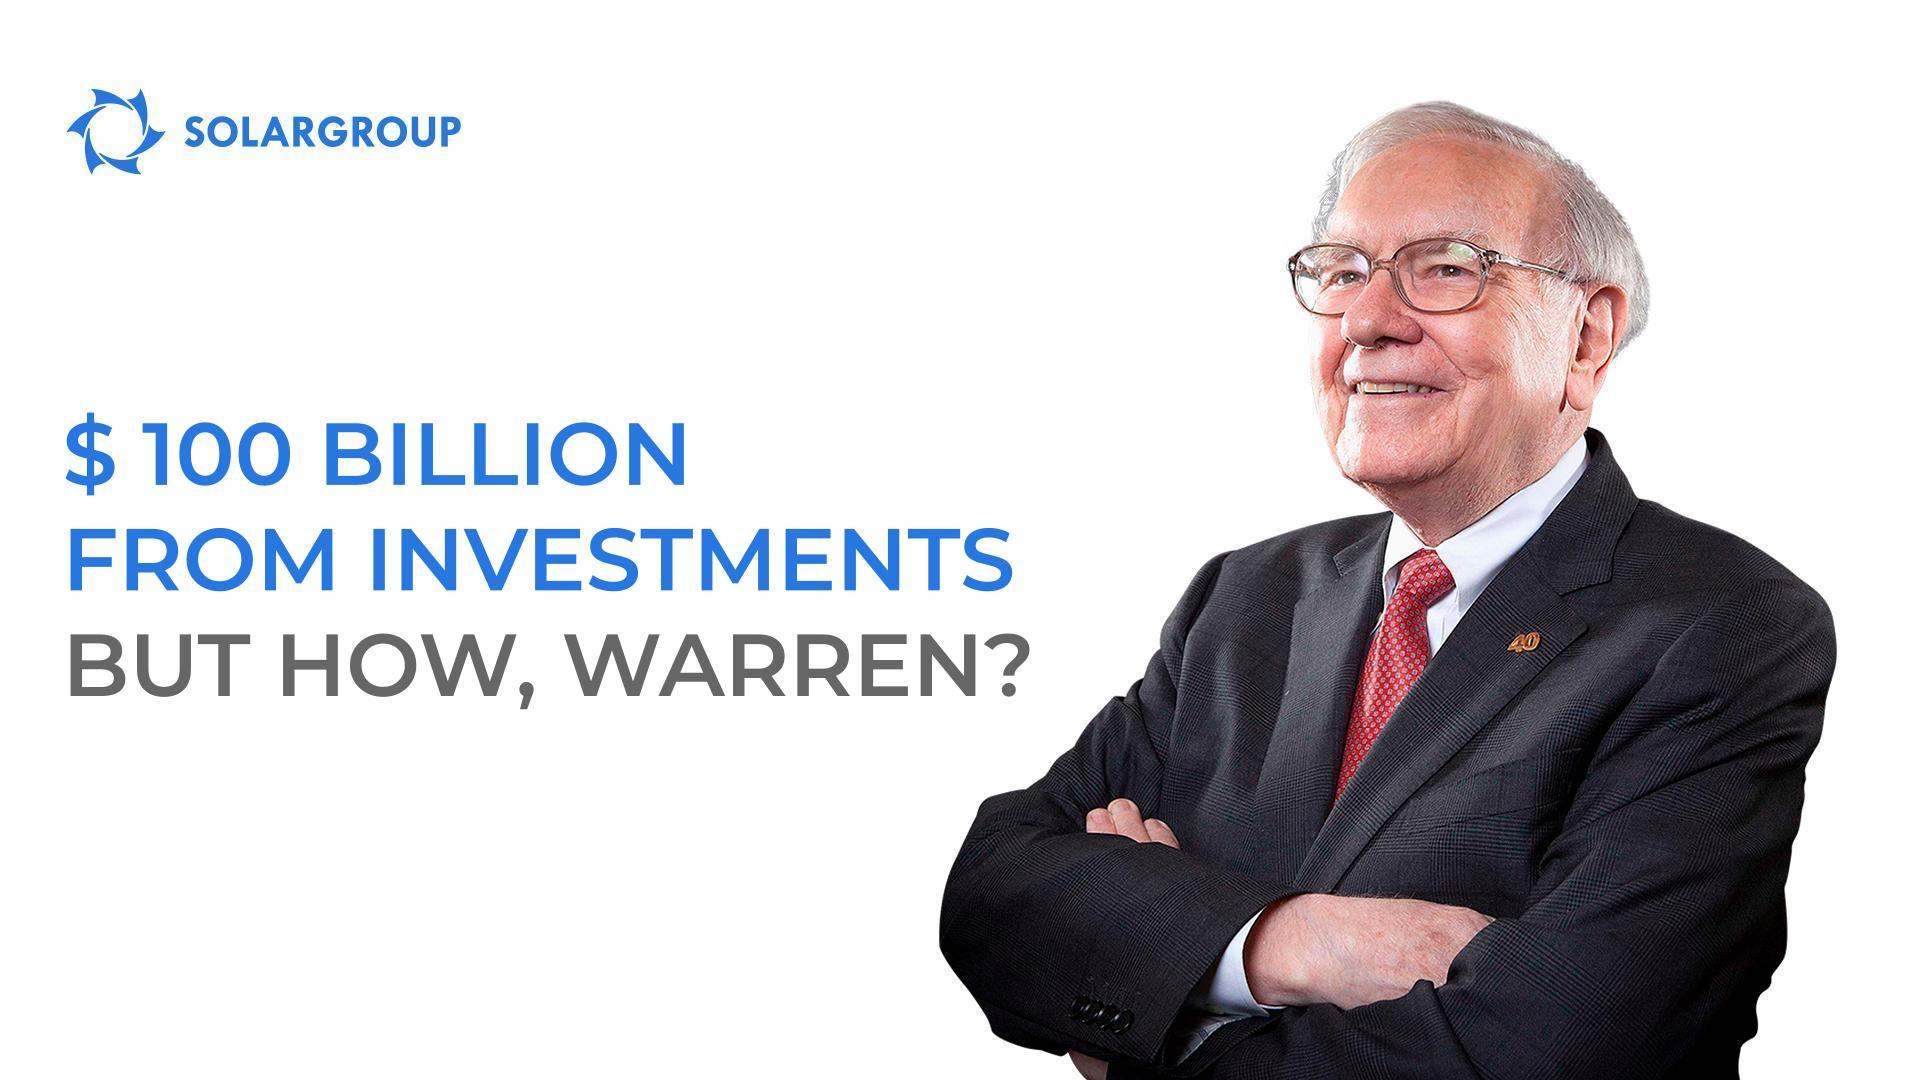 $ 100 billion from investments: but how, Warren?